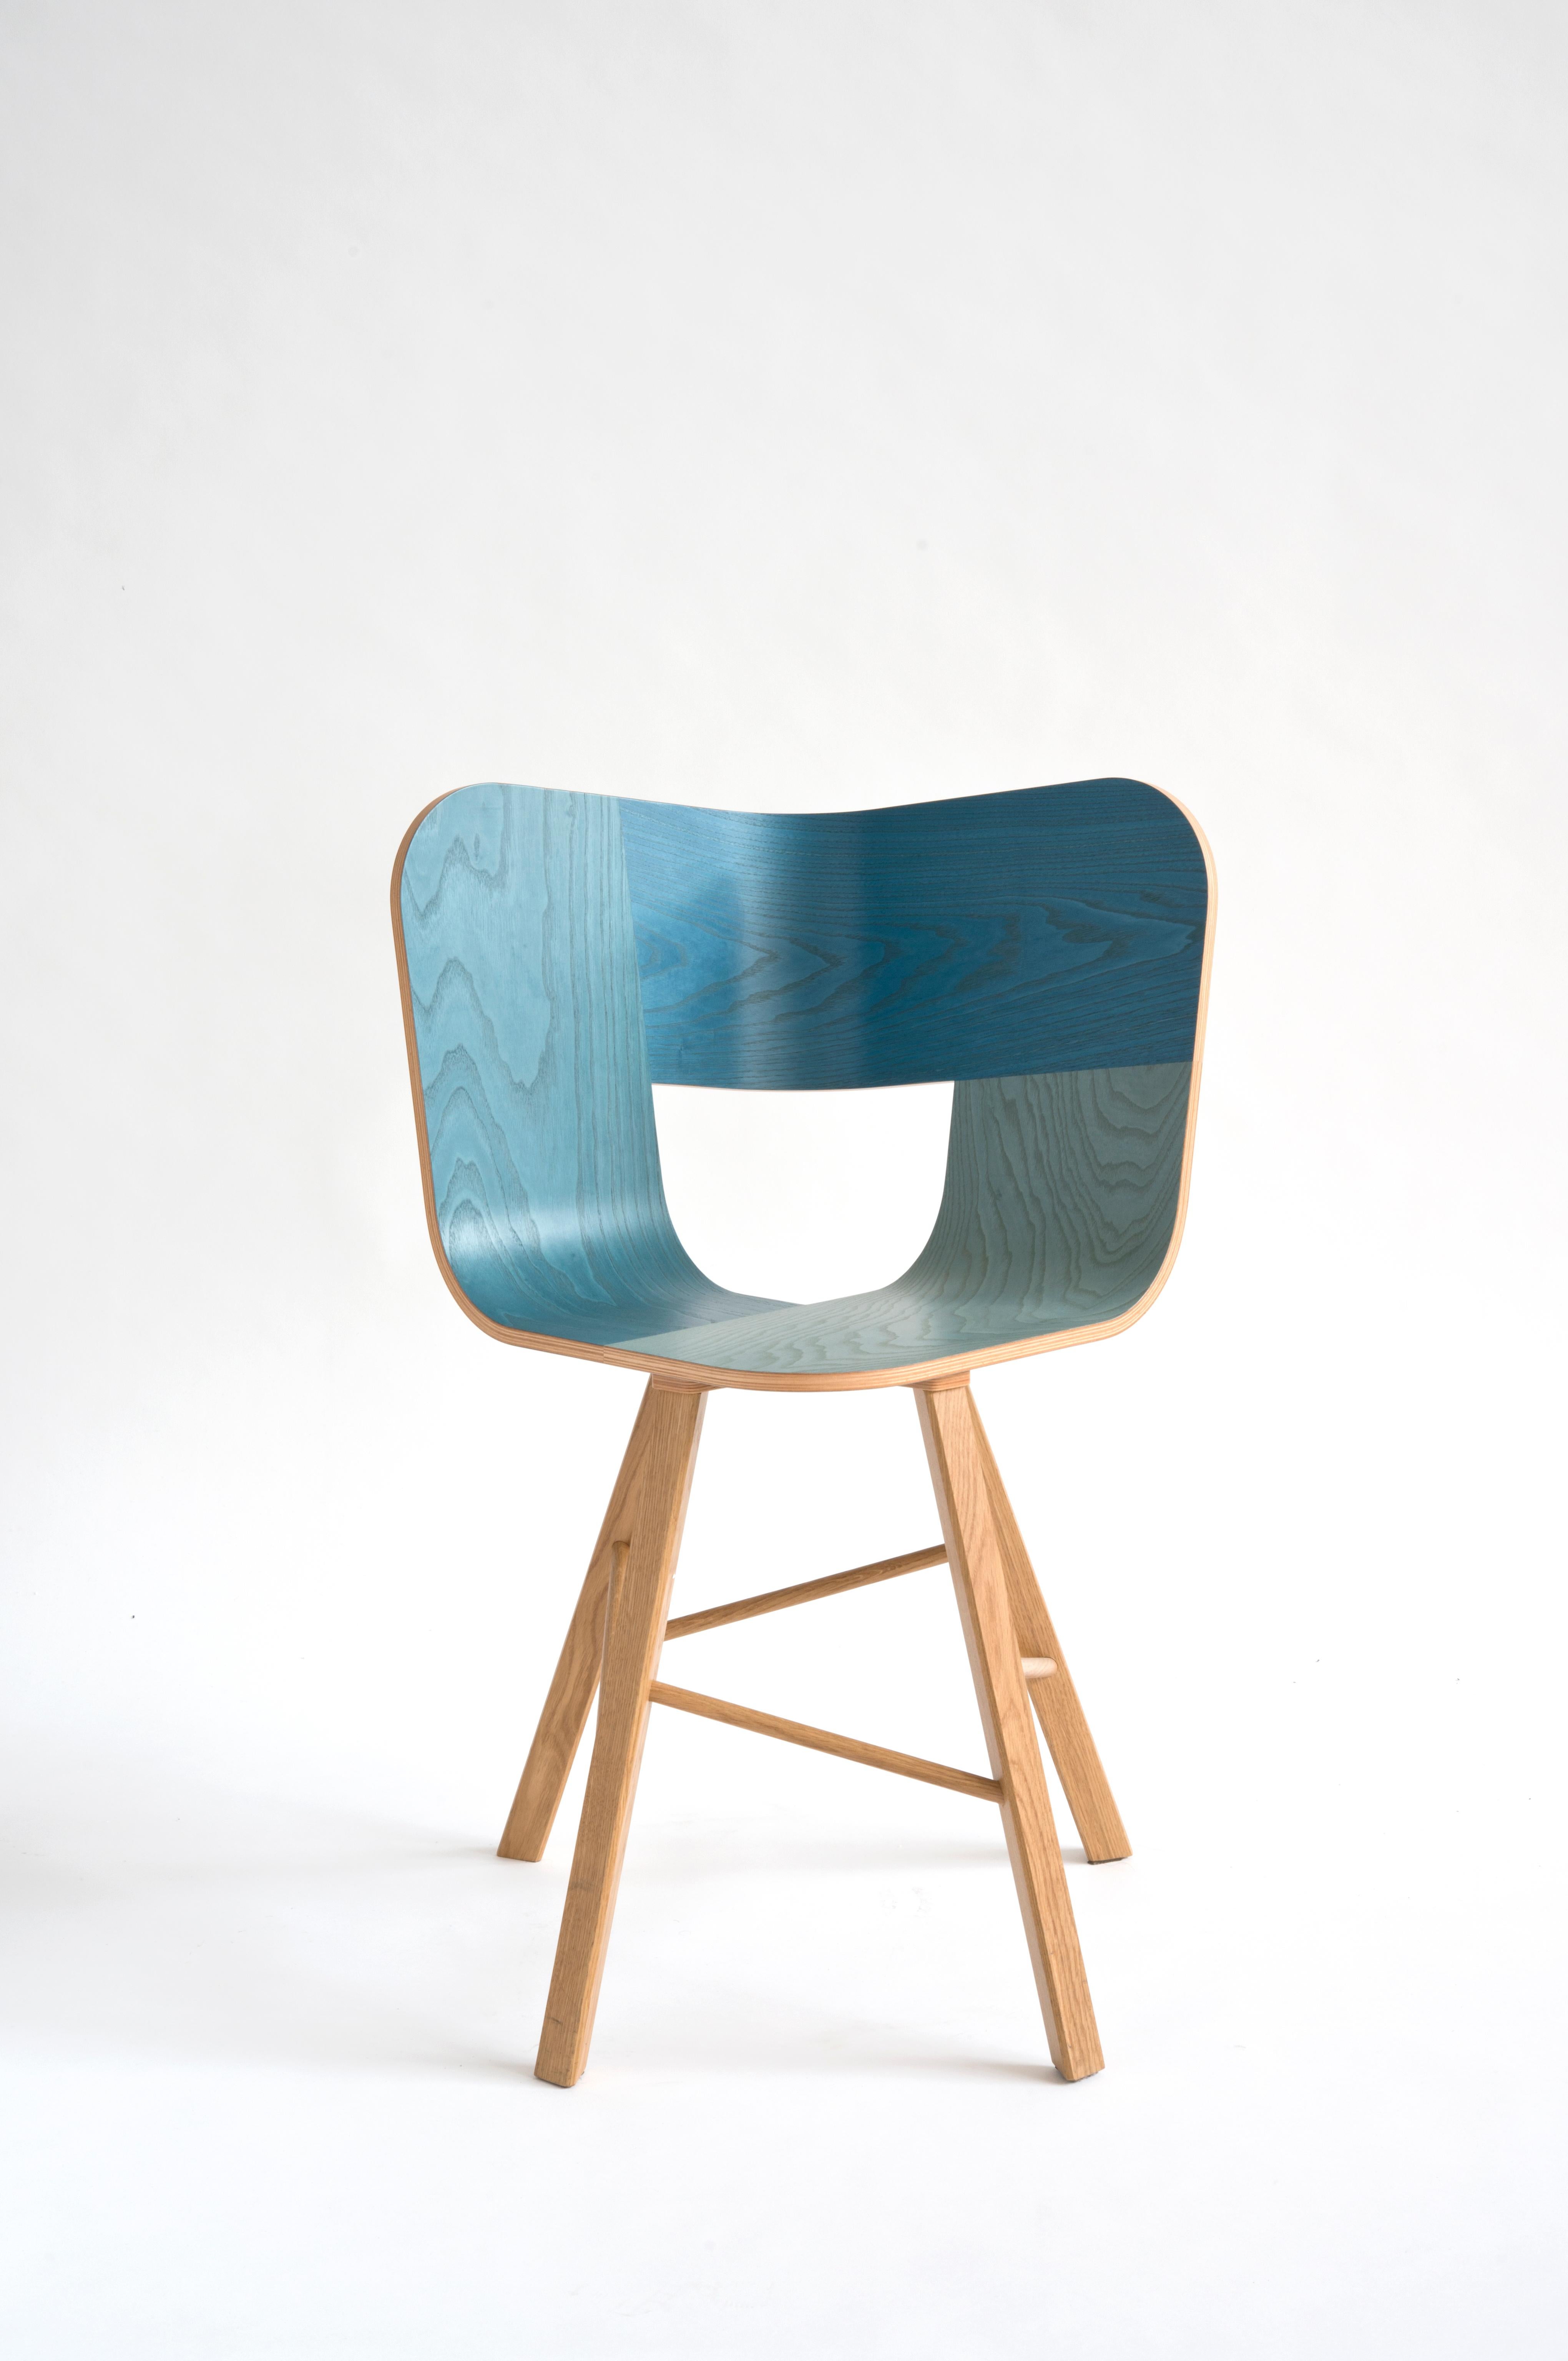 Tria wood 4 legs chair, Denim by Colé Italia with Lorenz & Kaz
(RAL color seat - RAL color painted legs)
Dimensions: H 82.5, D 52, W 61 cm
Materials: Plywood chair; 4 legs solid oak base

Also available: Tria; 3 legs, with cushion, black, gold,